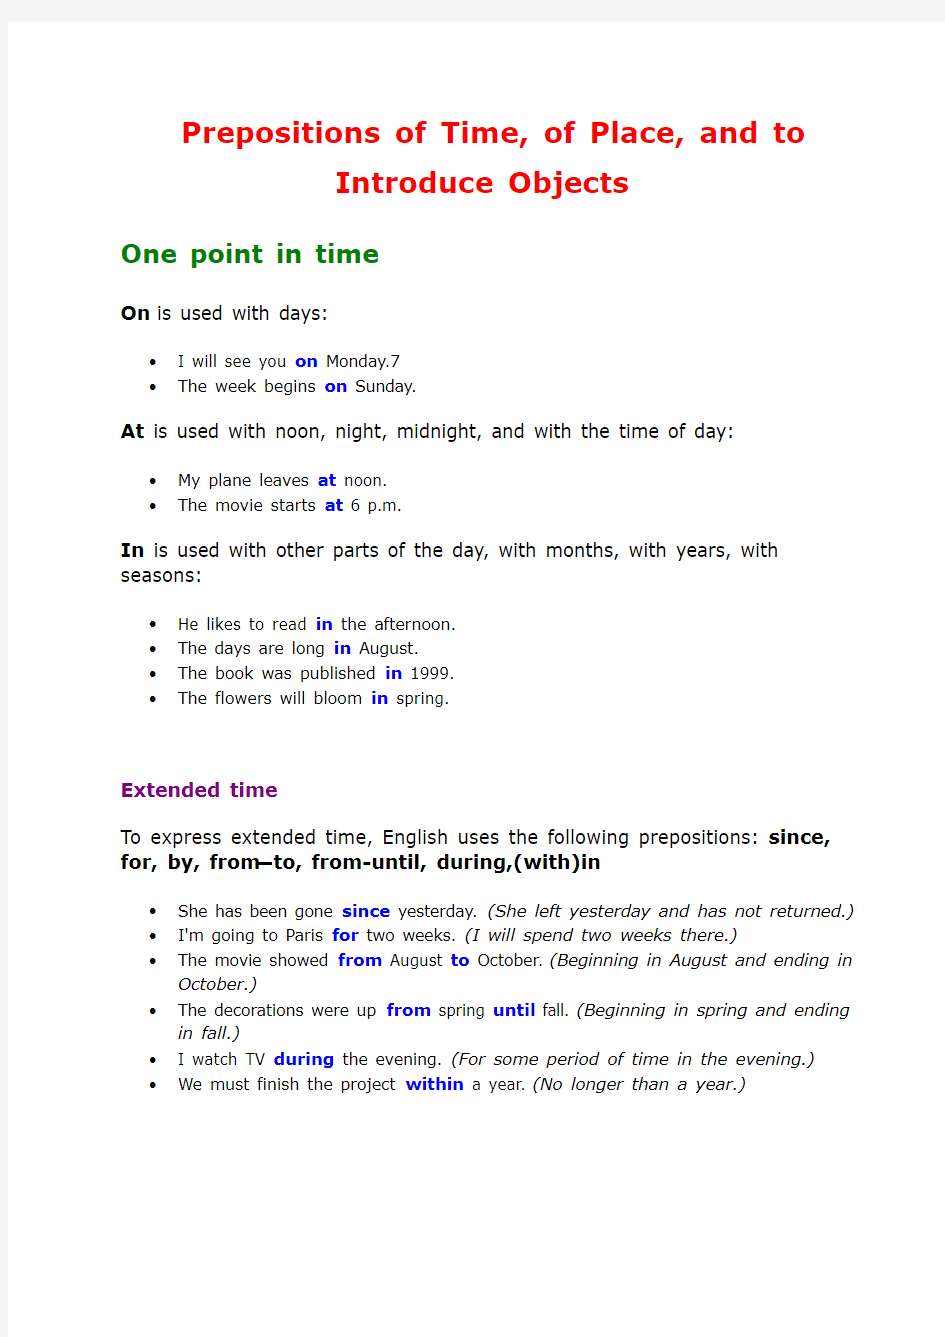 3 Prepositions of Time, of Place, and to Introduce Objects